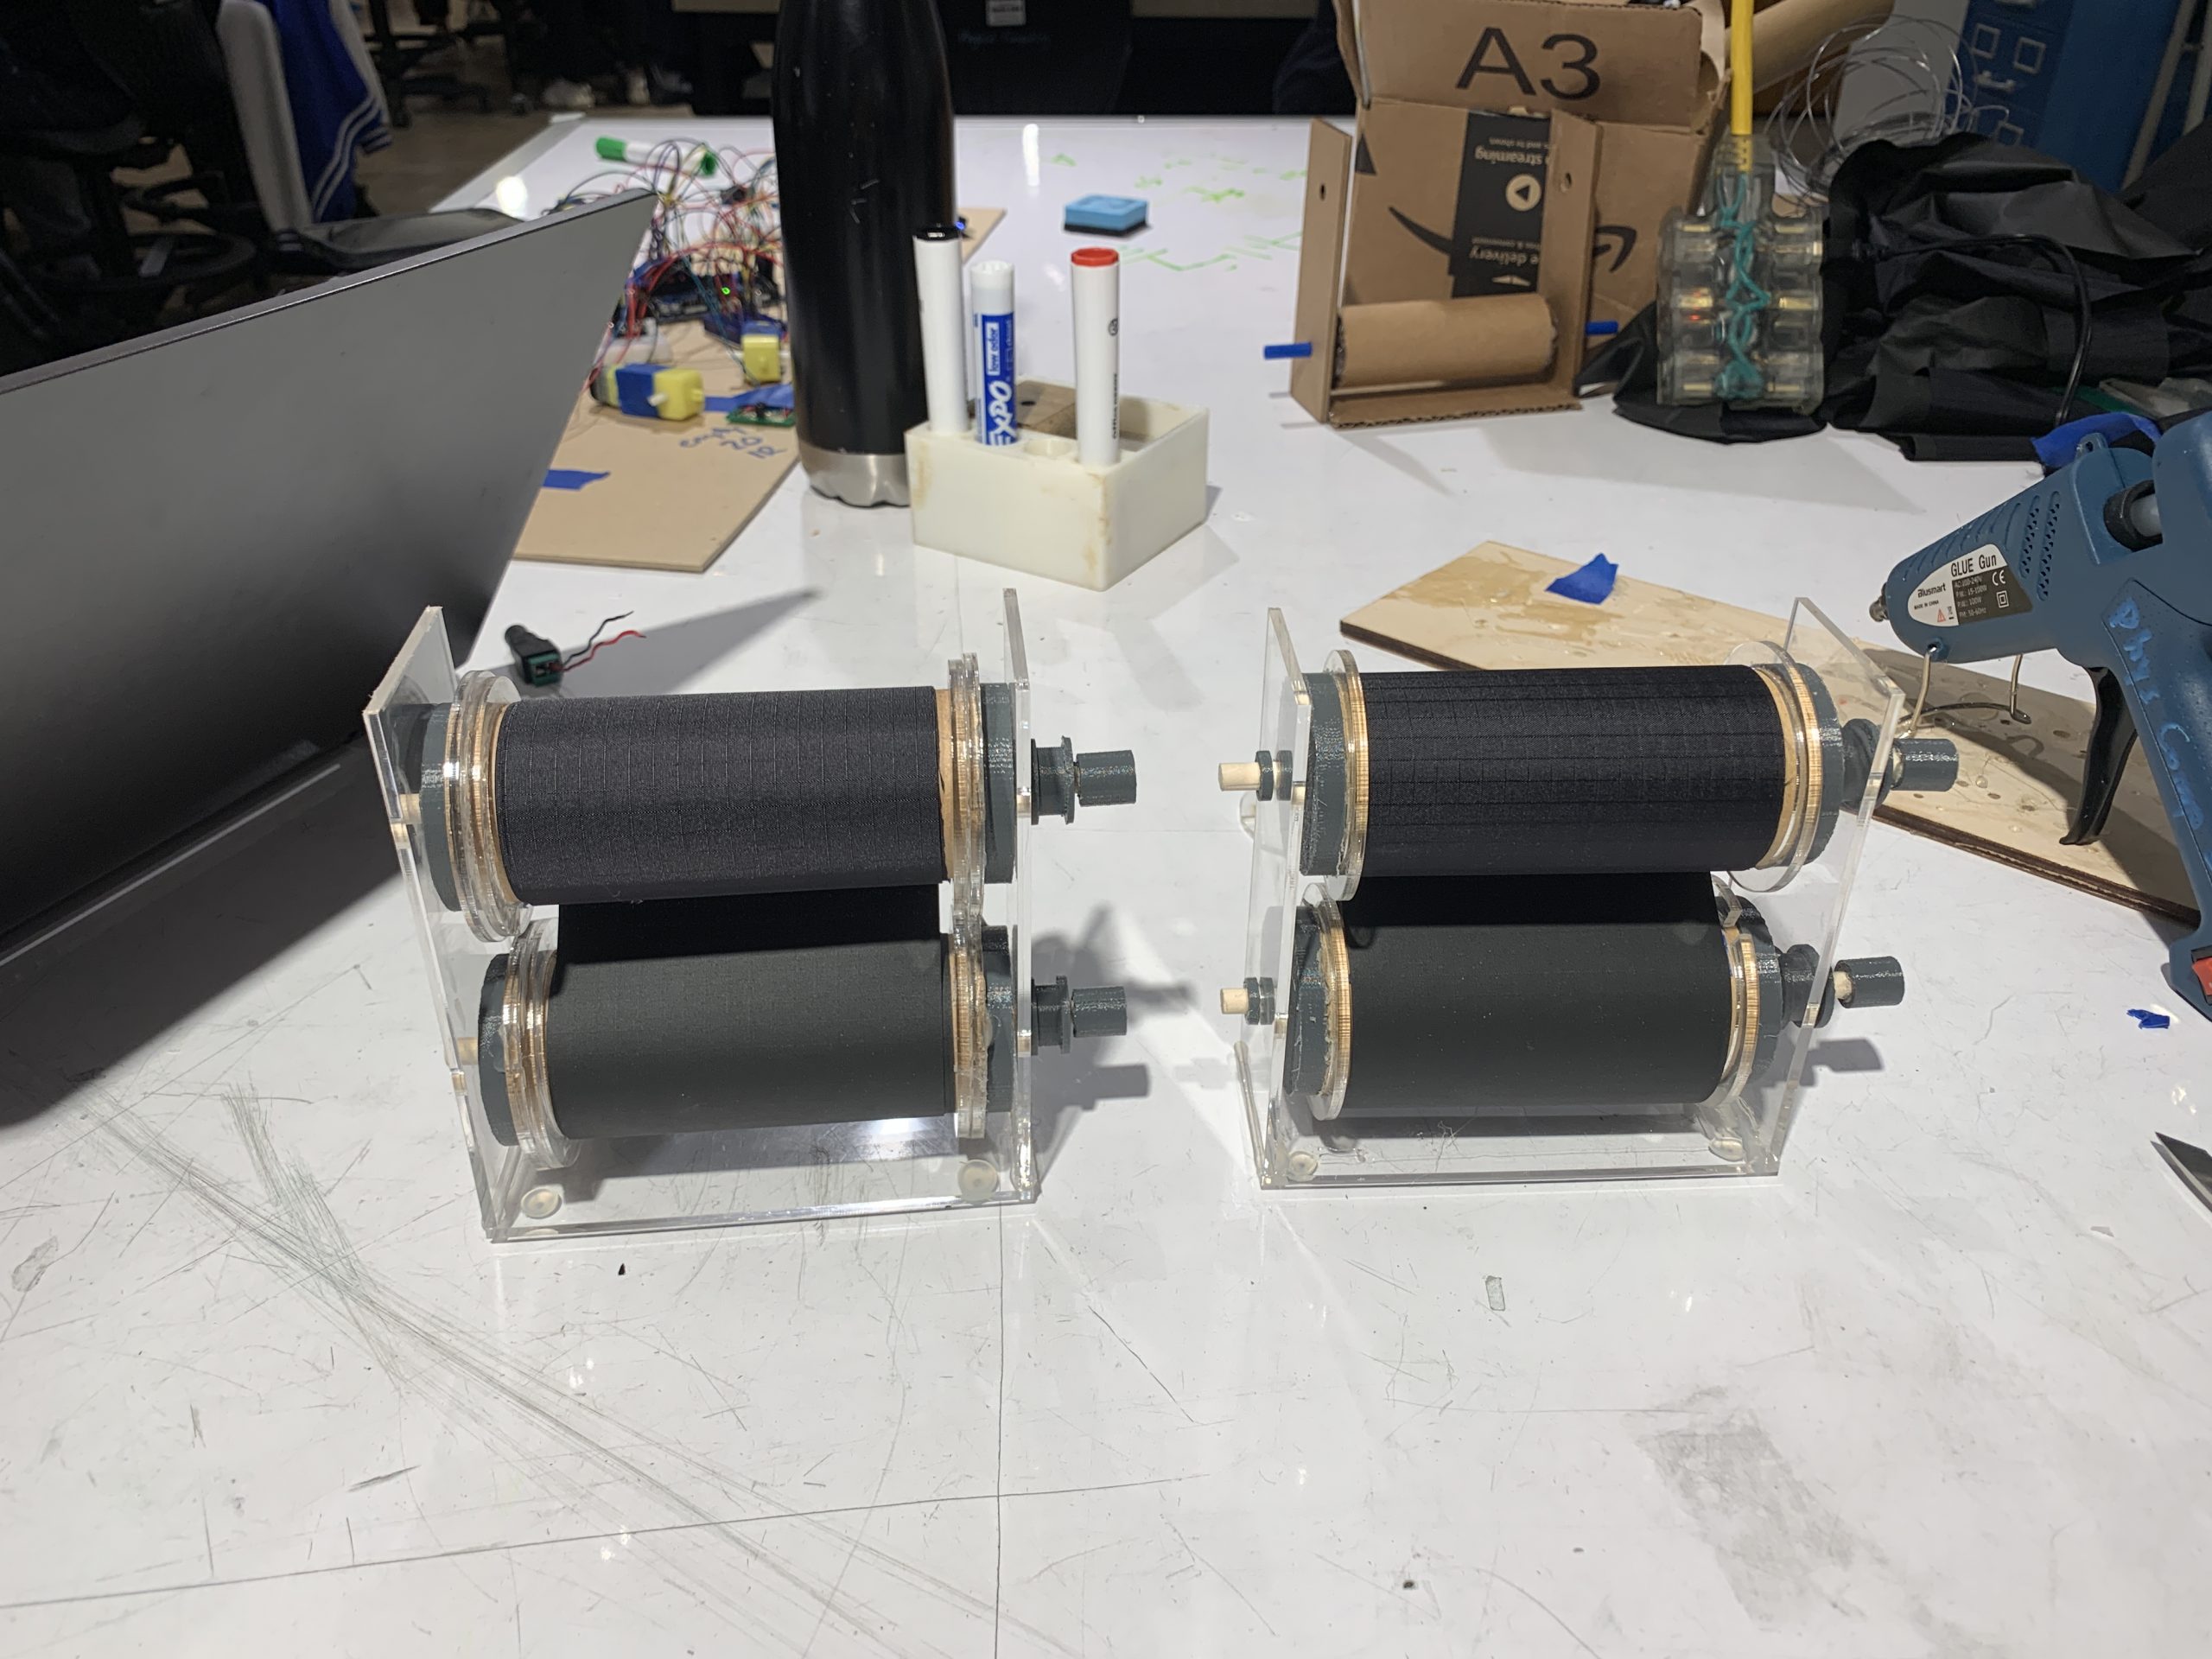 Two fully-constructed bill rollers. These rollers are made from toilet paper tubes wrapped with black nylon fabric, and have gray 3D-printed connectors on the end to pair with the toy gear box motors.